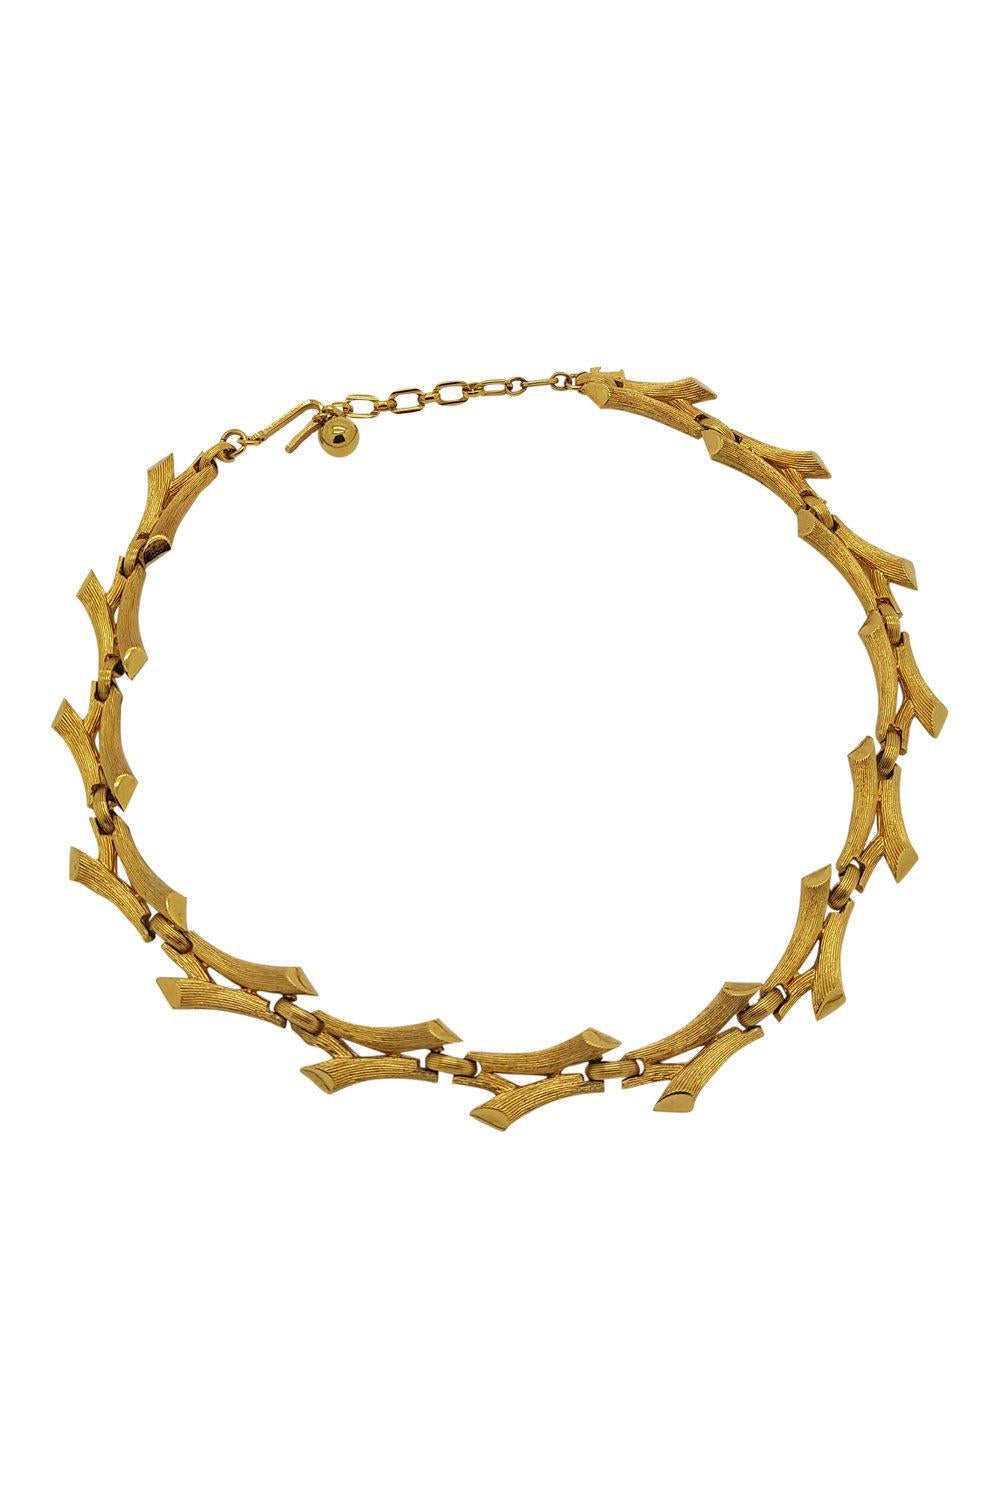 VINTAGE TRIFARI Gold Plated 1960s Flexible Collar Necklace (15")-The Freperie